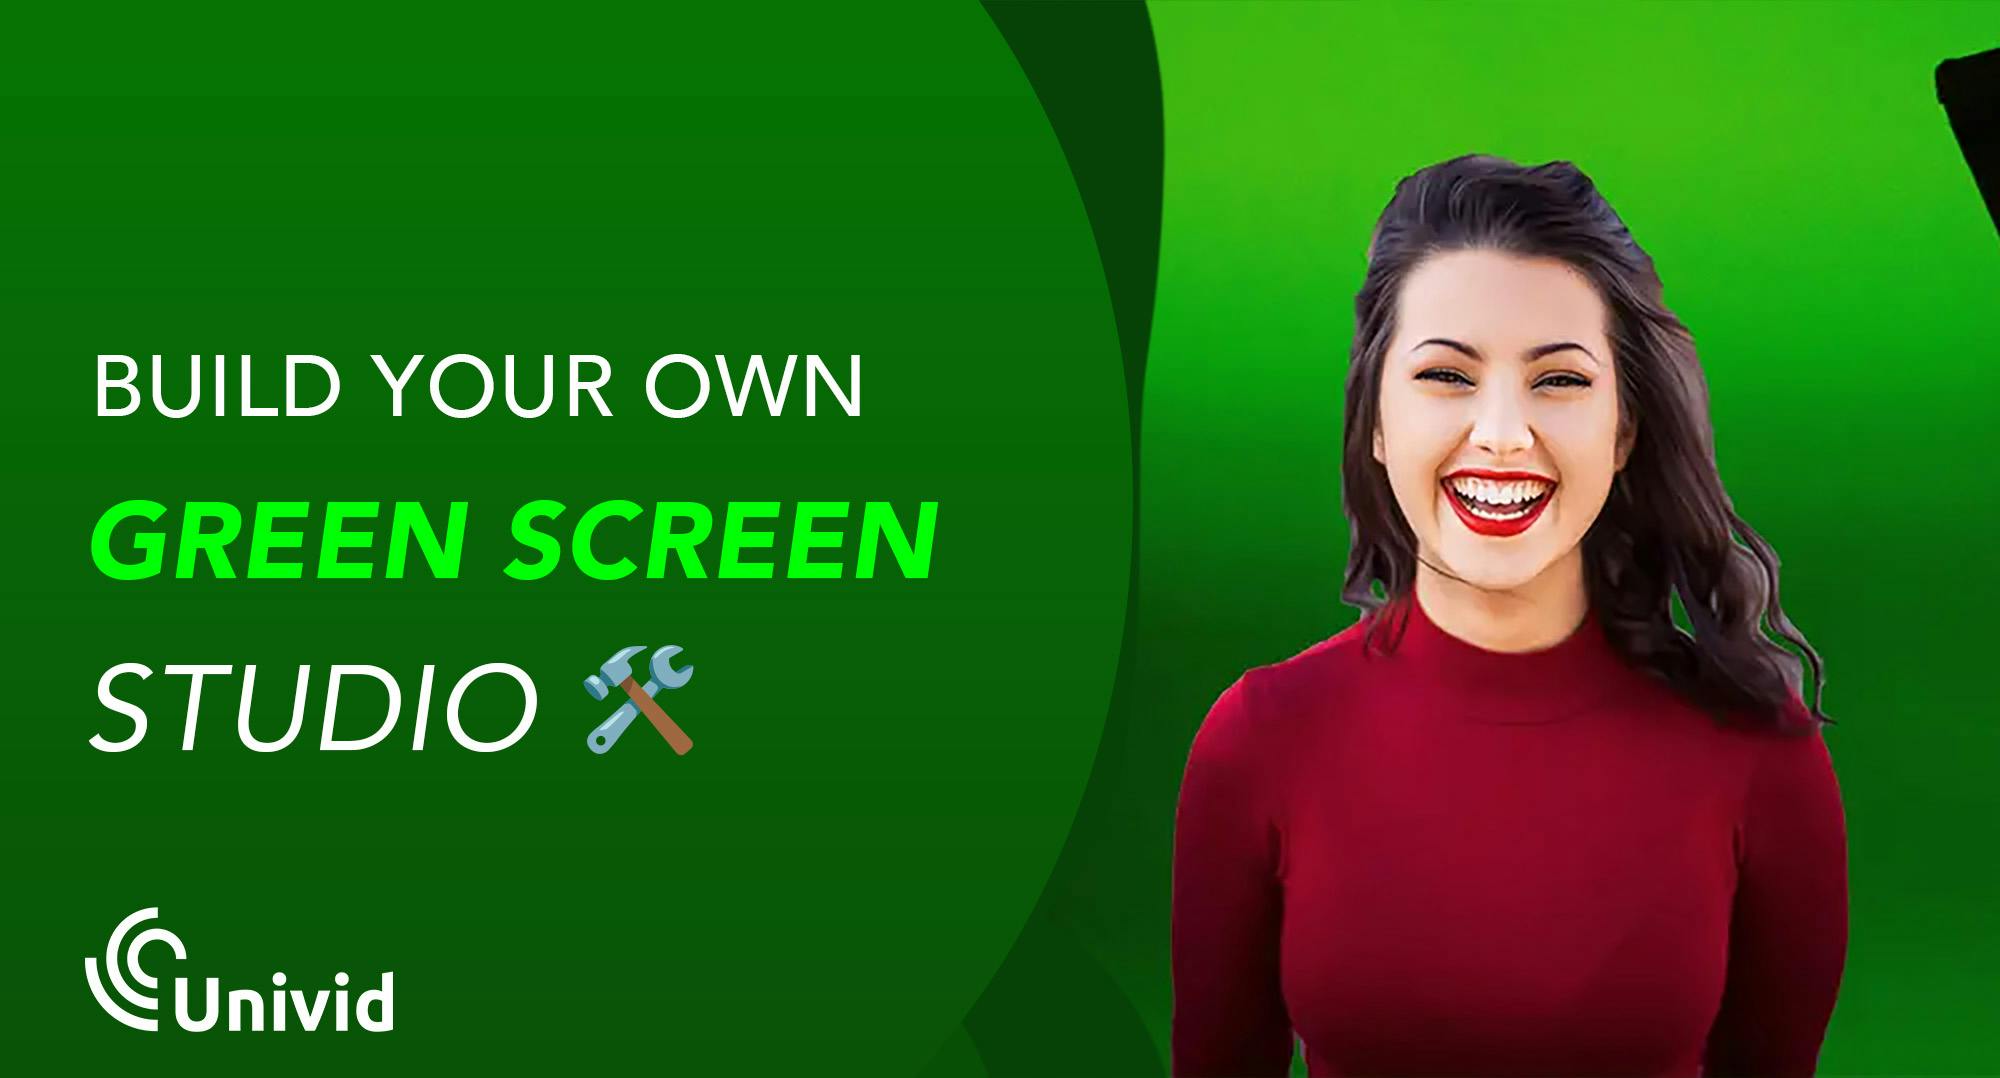 Build a green screen studio yourself - For the office or at home